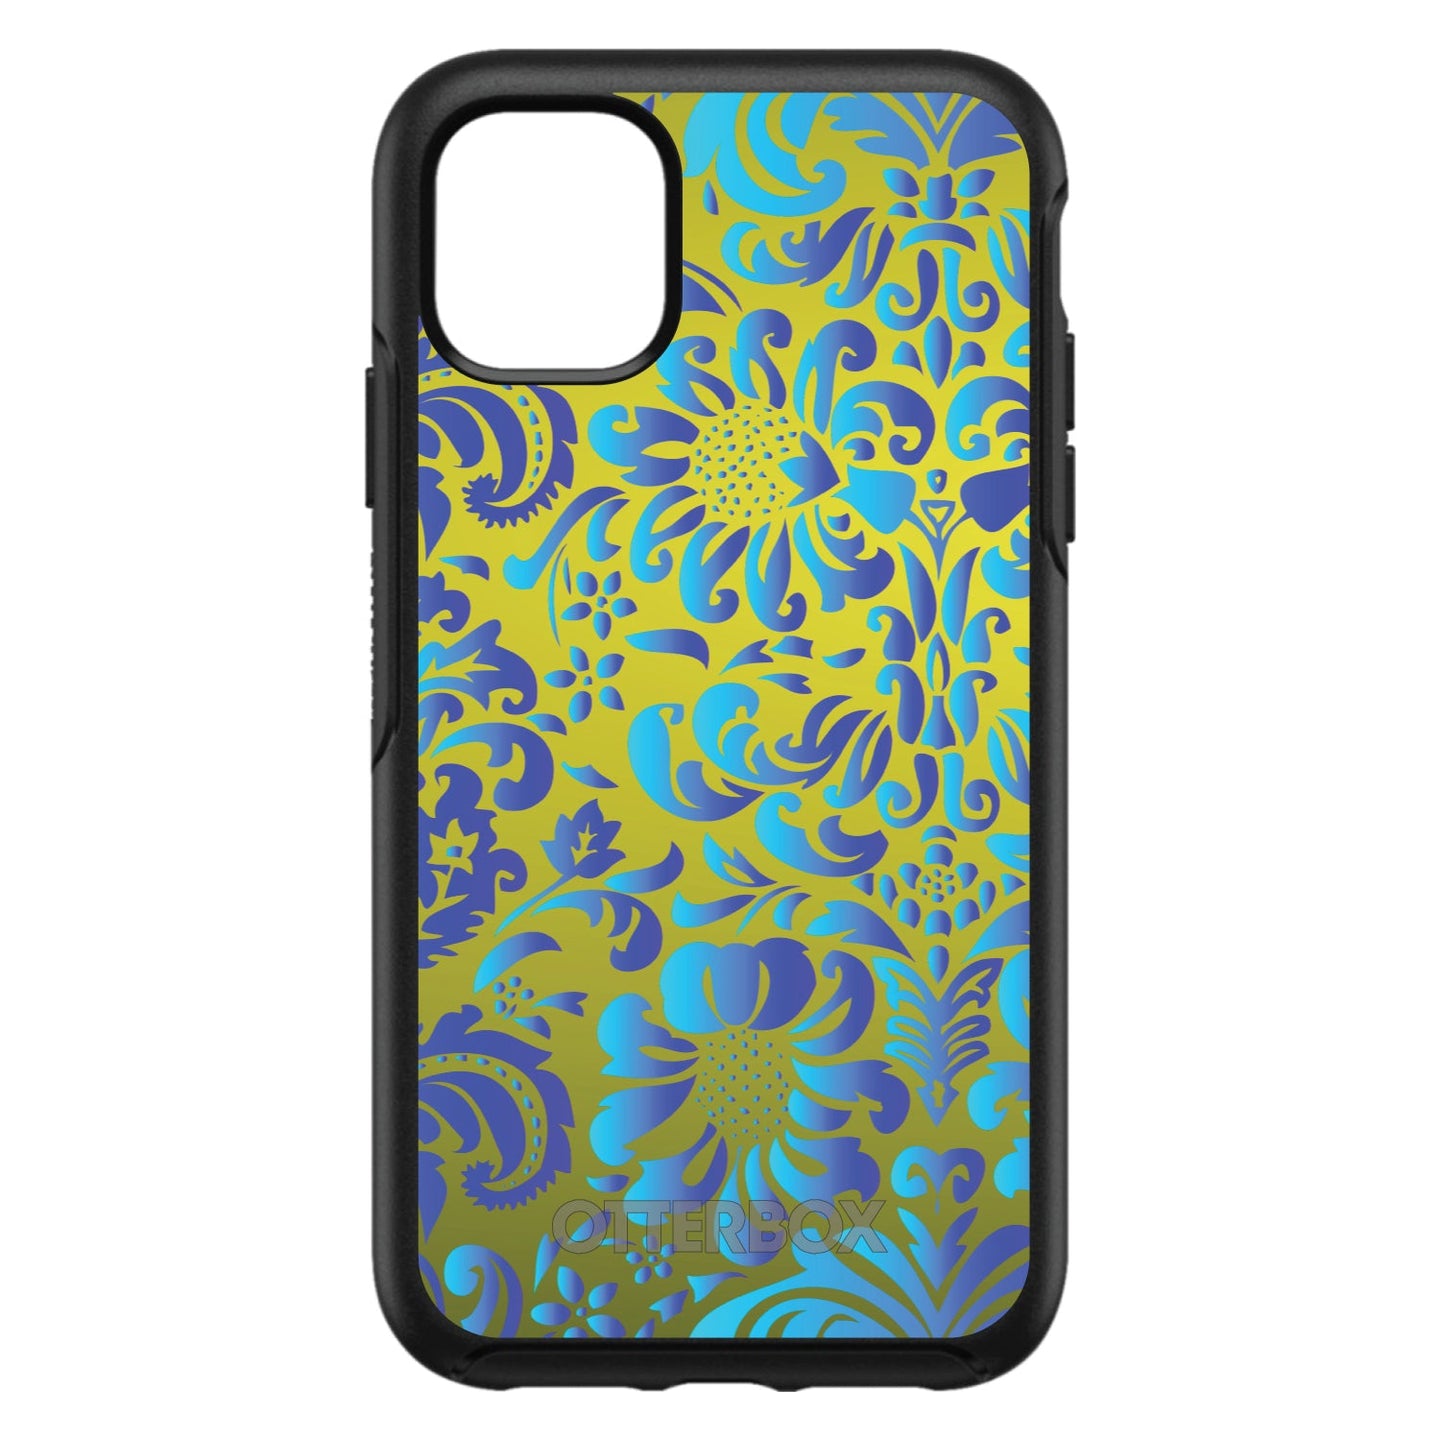 DistinctInk™ OtterBox Symmetry Series Case for Apple iPhone / Samsung Galaxy / Google Pixel - Green Blue Teal Floral Pattern